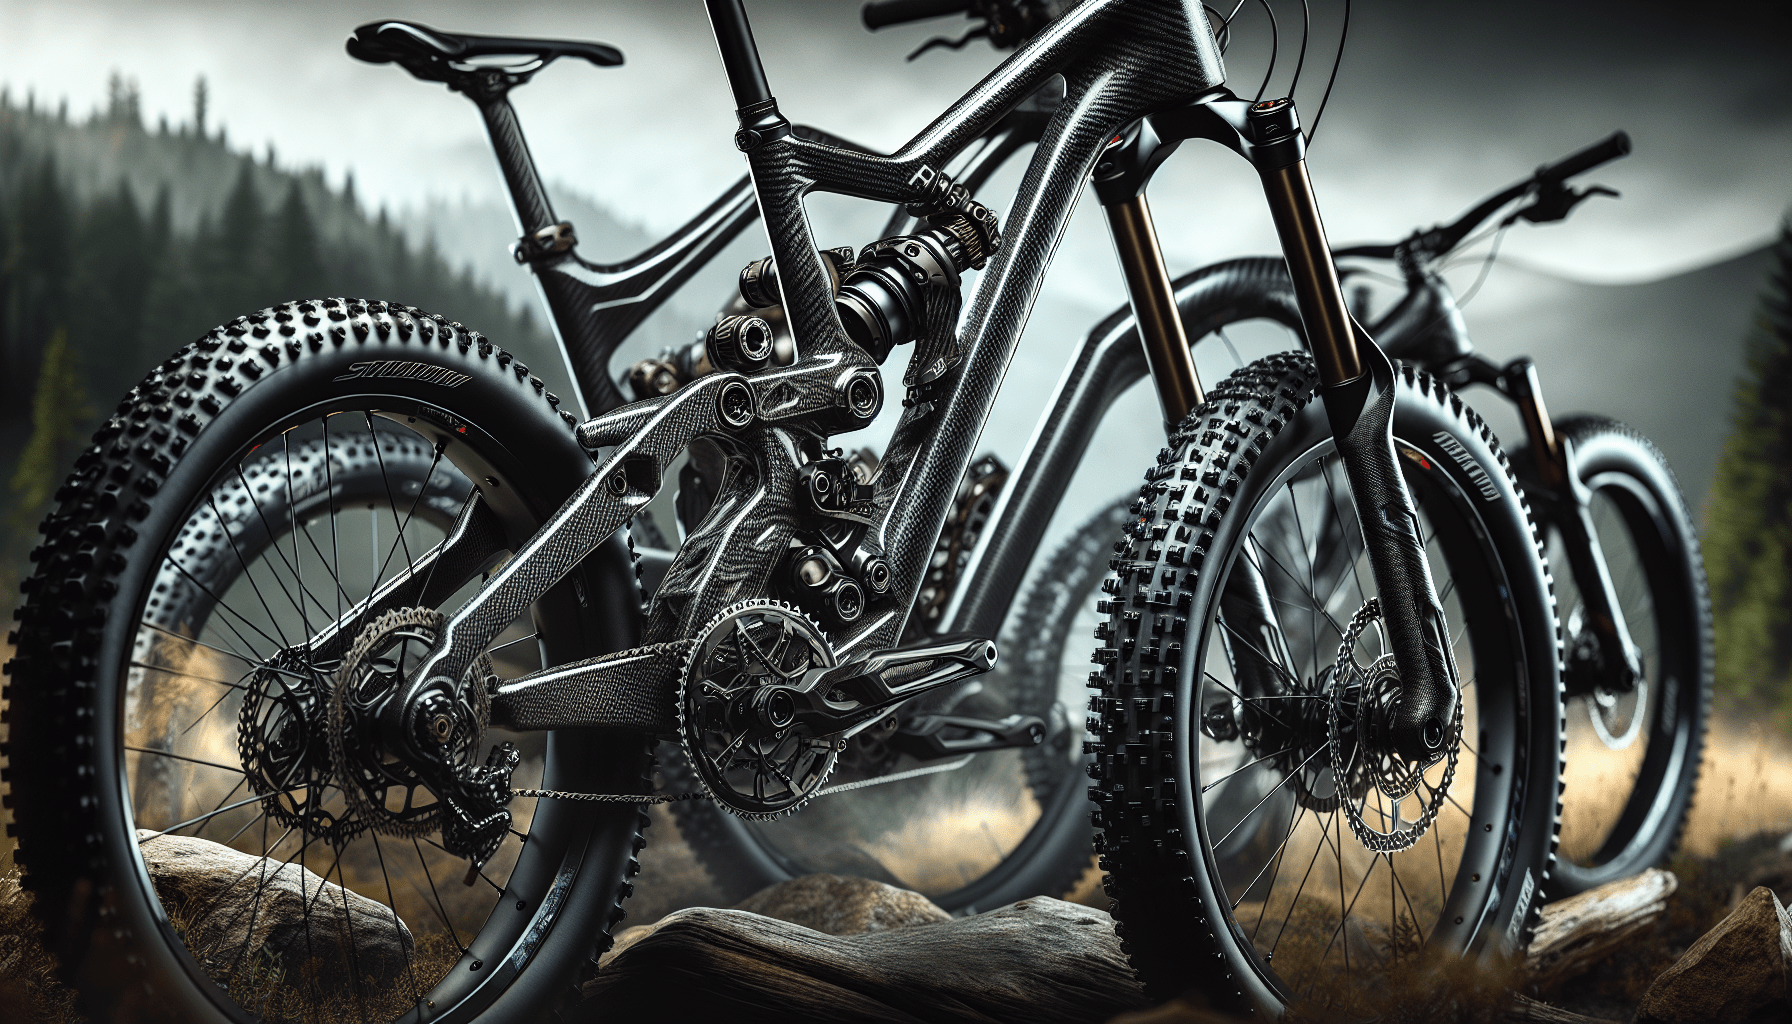 Dominate The Trails With The Top 3 Carbon Off-Road Bikes – Get Started!